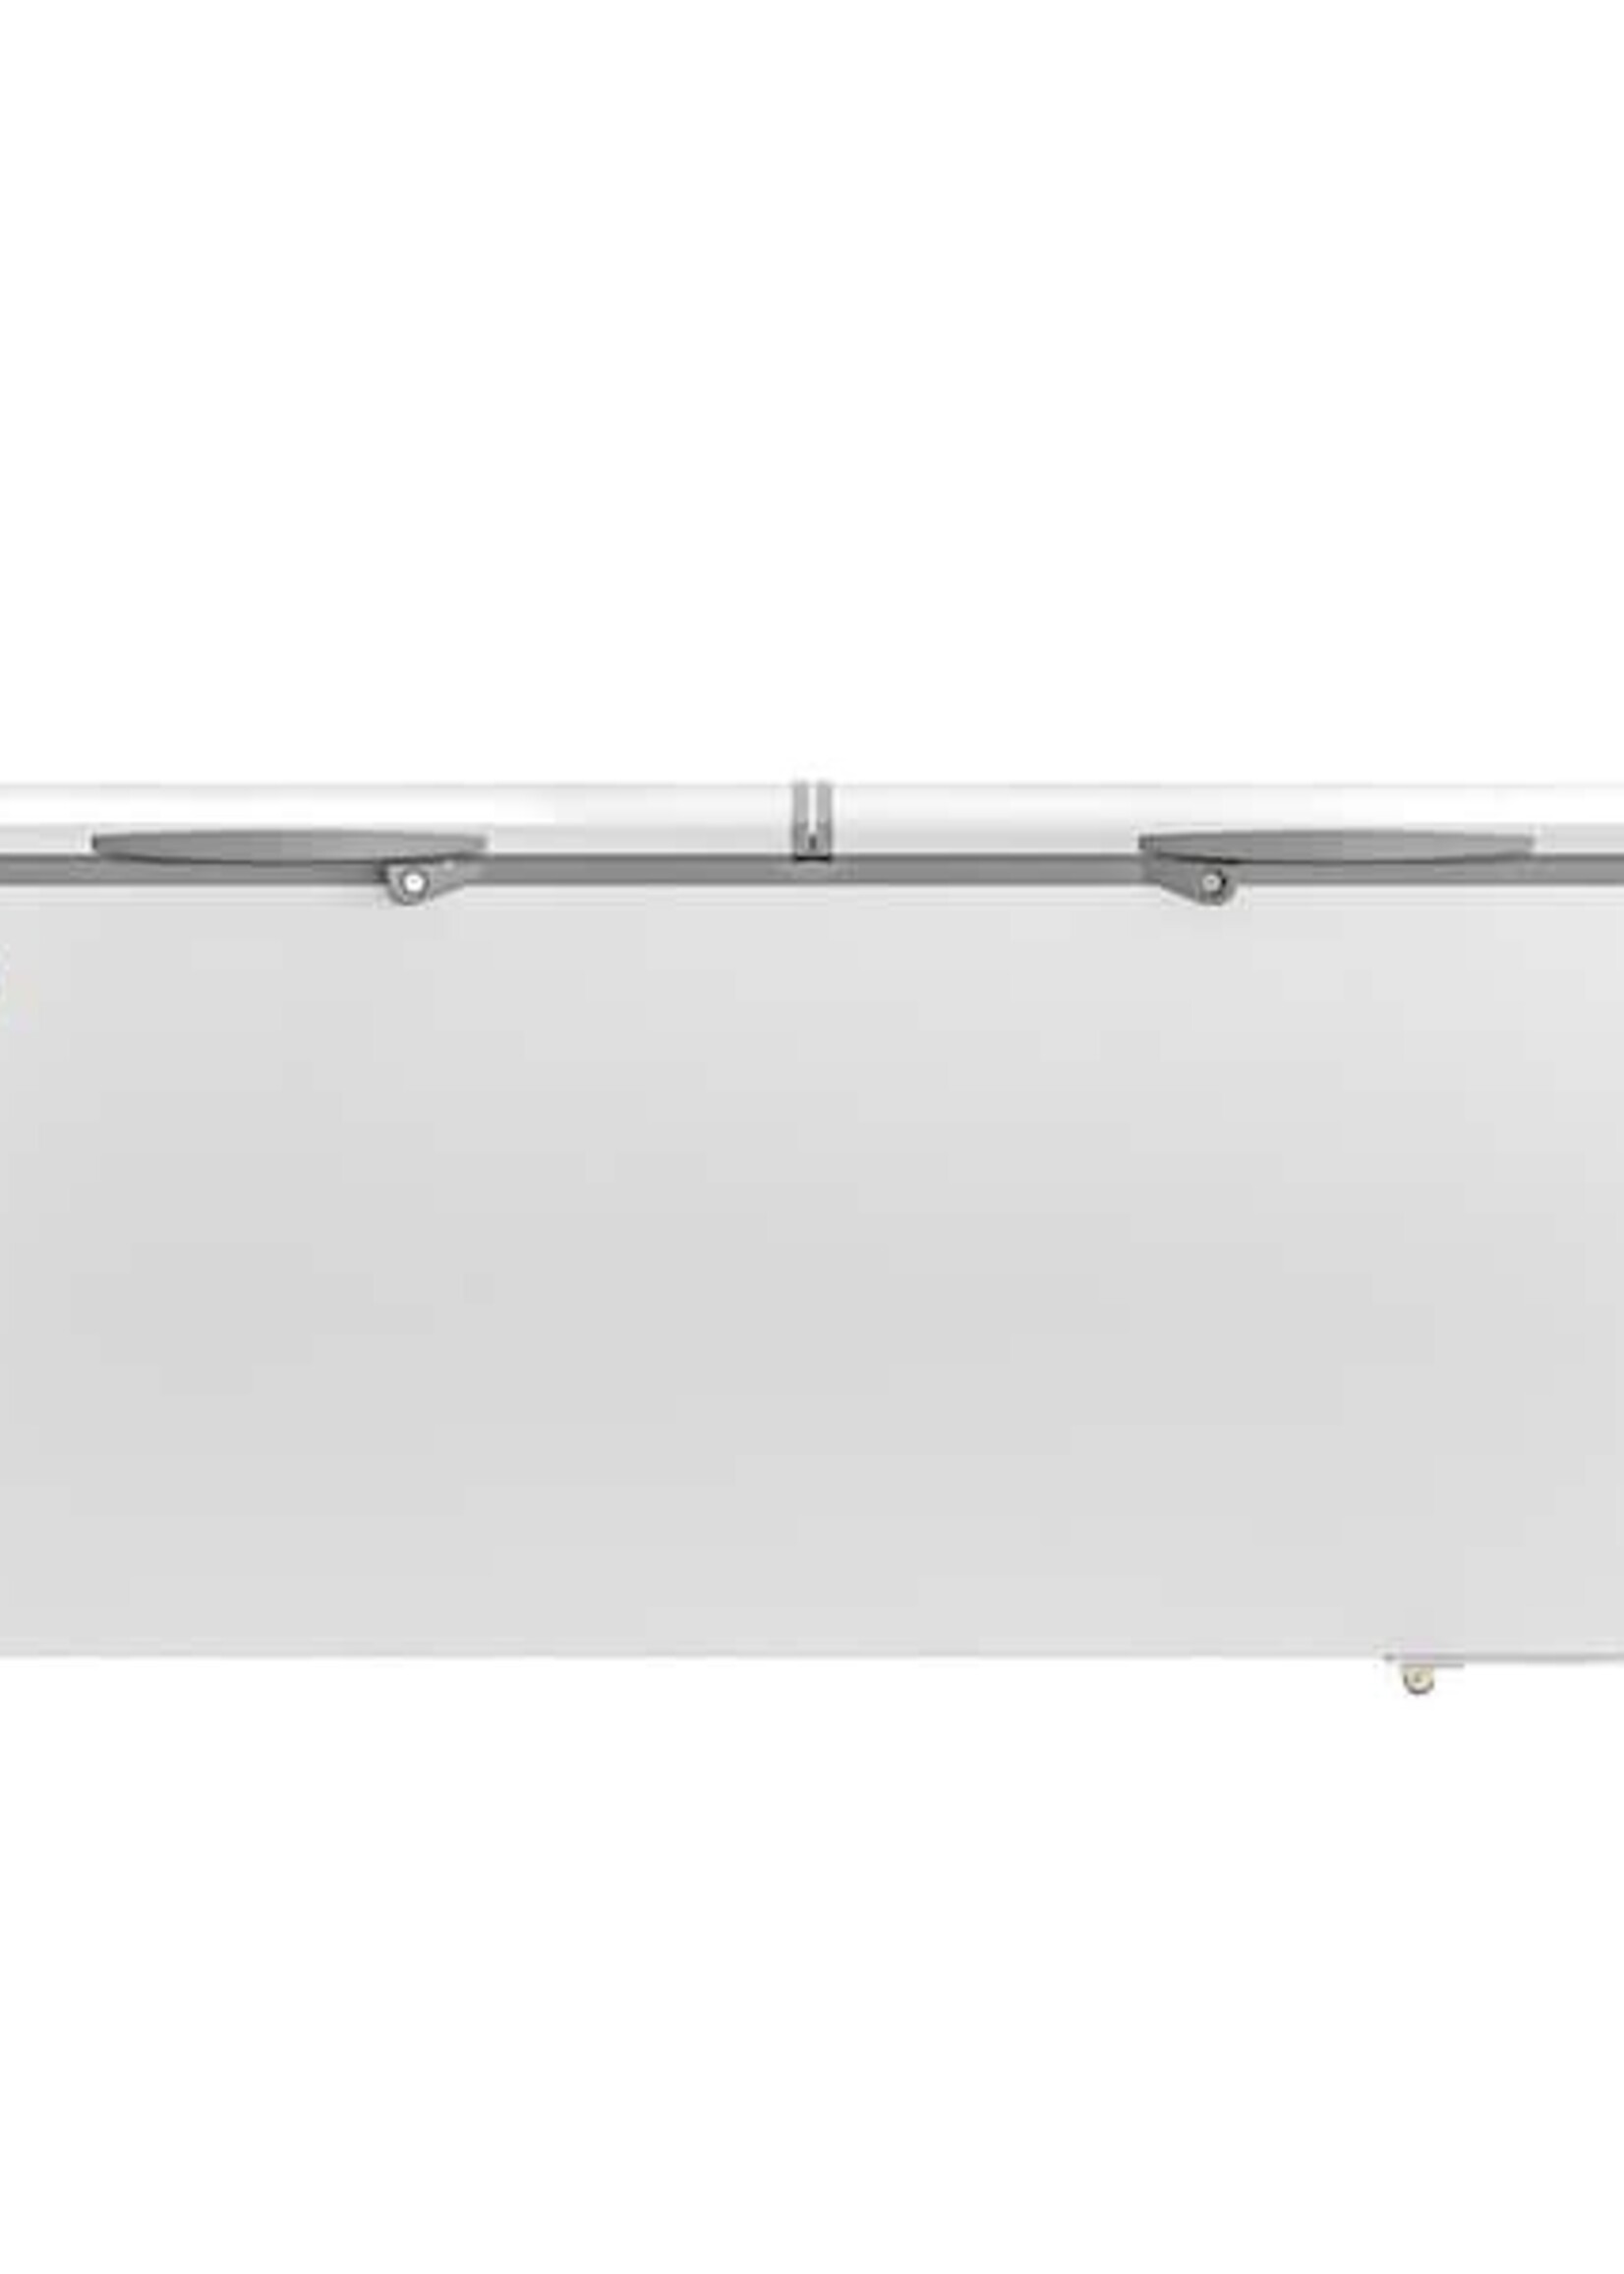 Kool More *Kool More   2LFC-24CF  24 cu. ft. Manual Defrost Commercial Chest Freezer in White